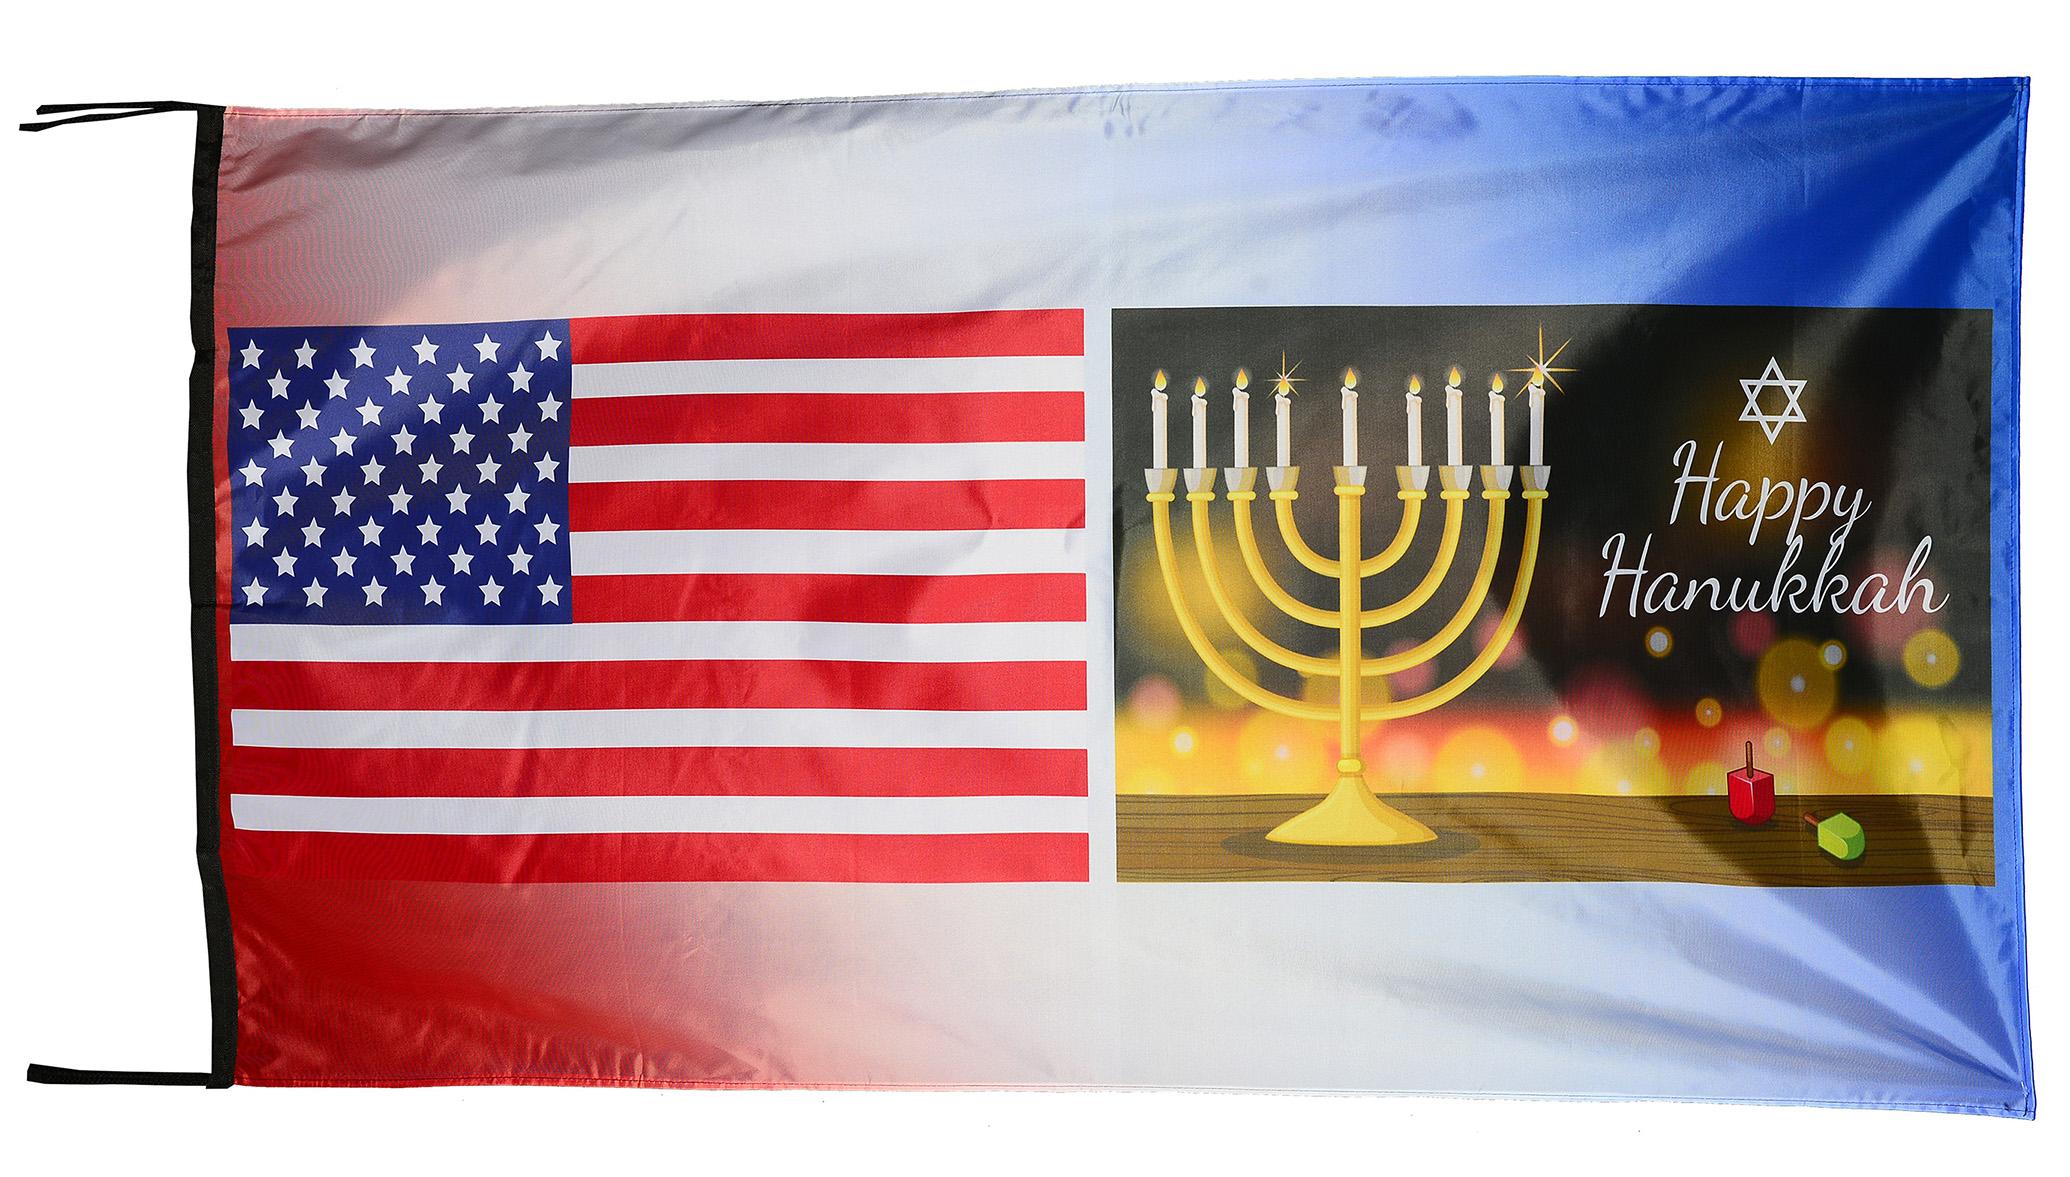 Flag  065 USA / US Country / United States Of America and Happy Hannukah / Jewish / Jew / Hollidays / Patriotic / Pride Hybrid Weather-Resistant Polyester Outdoor Flag Landscape Banner / Vivid Colors / 3 X 5 FT (150 x 90cm) International Flags for Sale